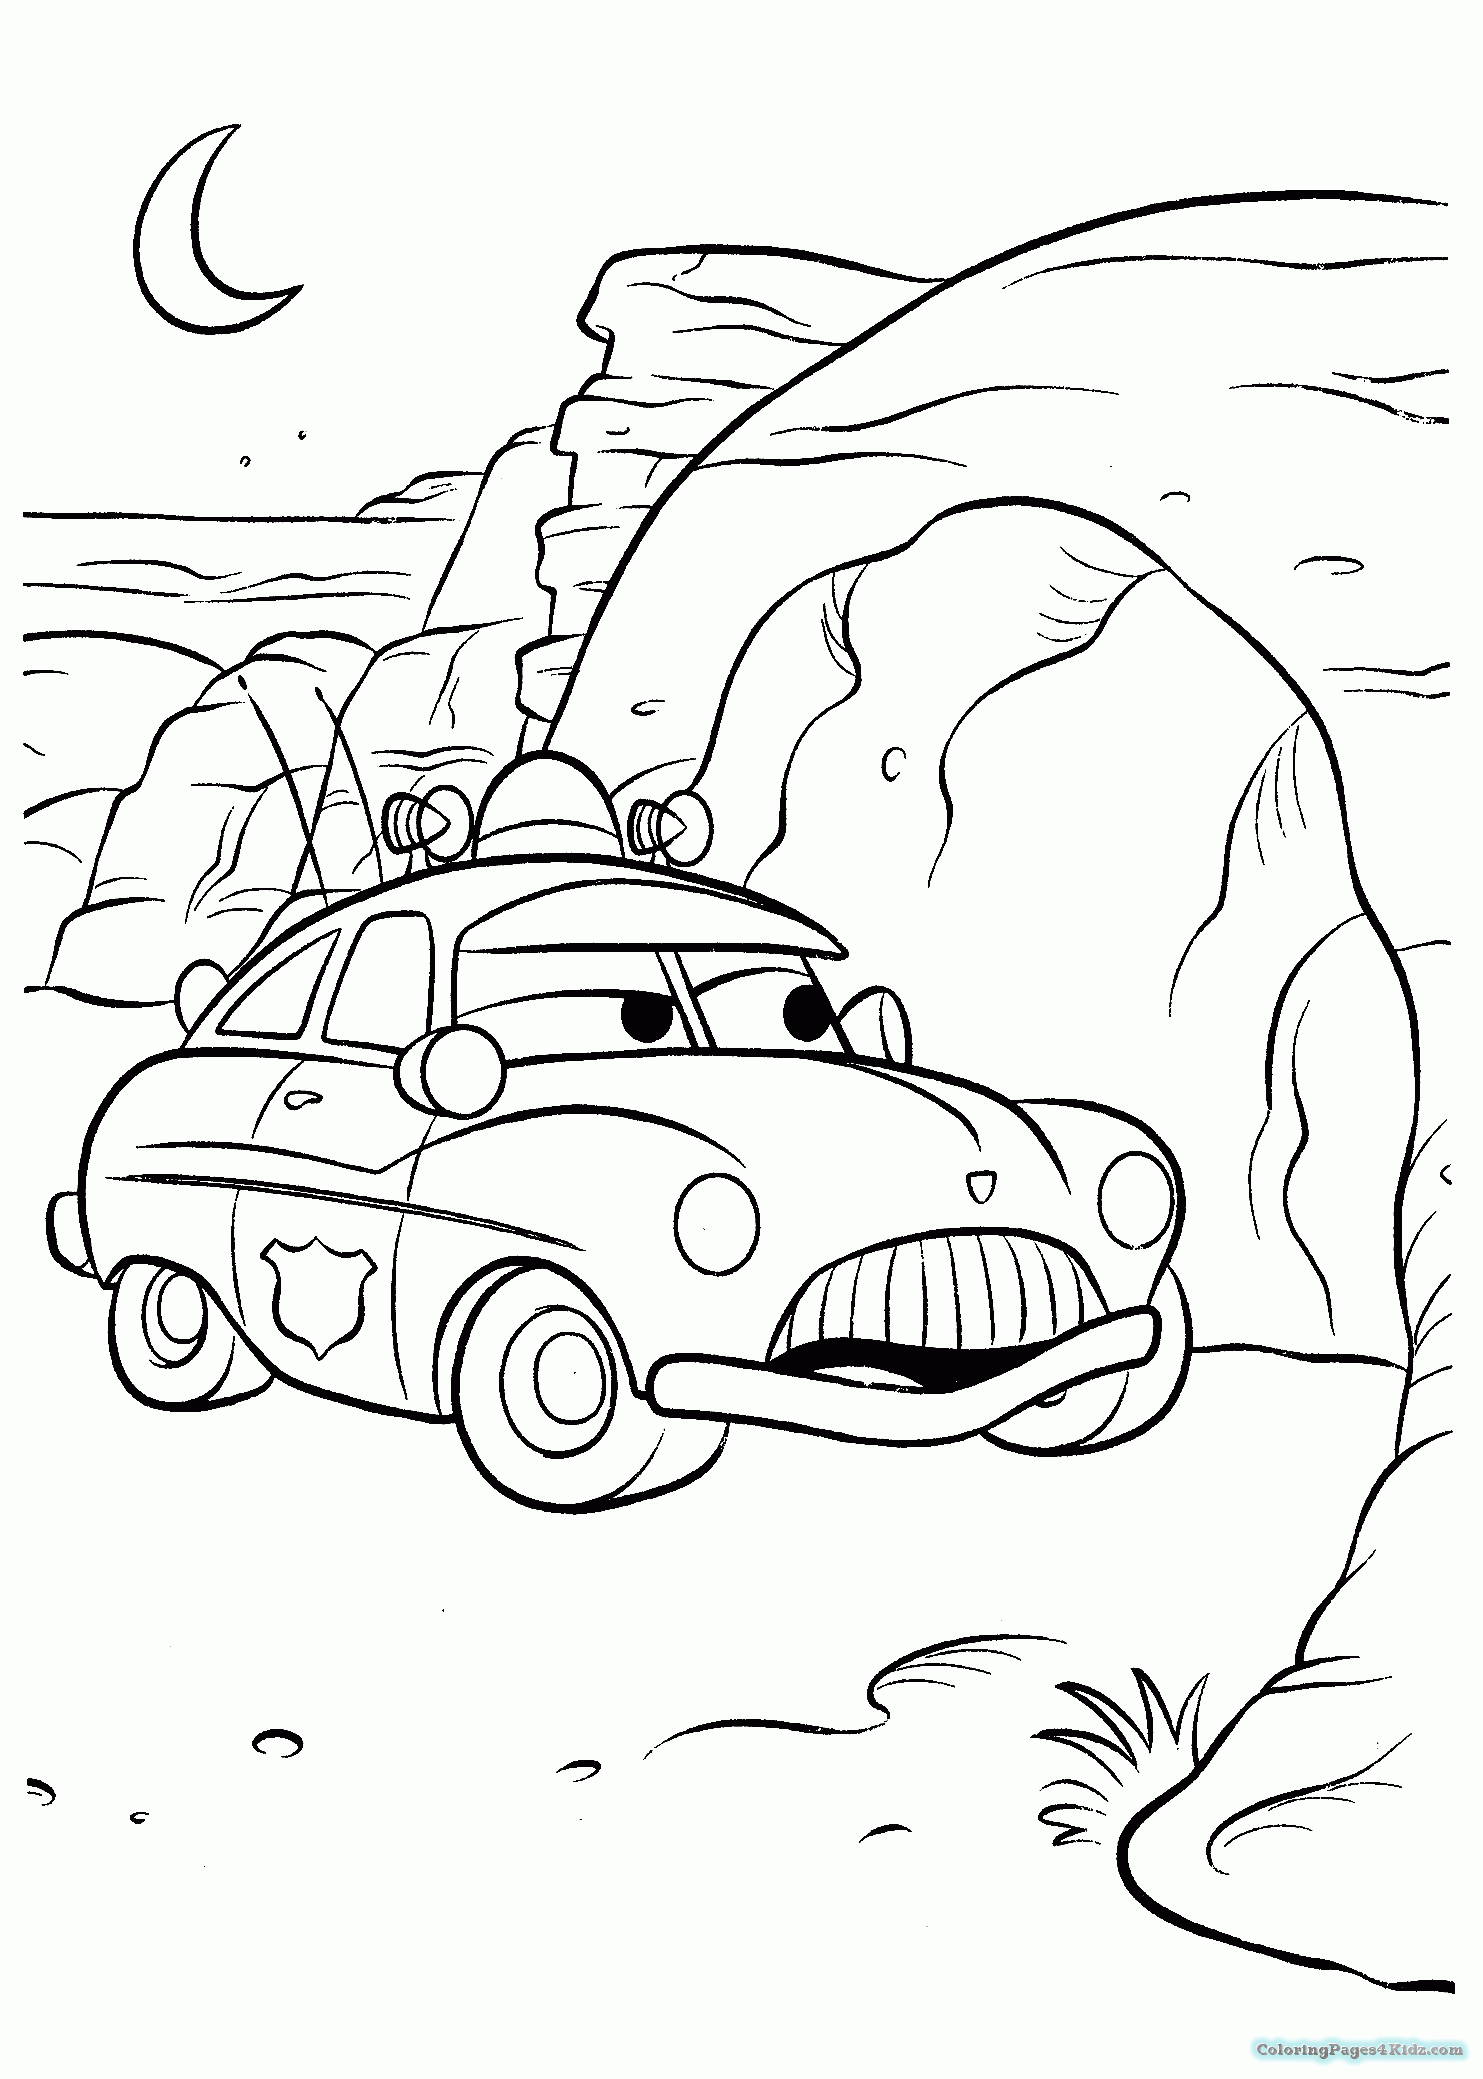 cop car coloring pages police car coloring page wecoloringpagecom cop coloring pages car 